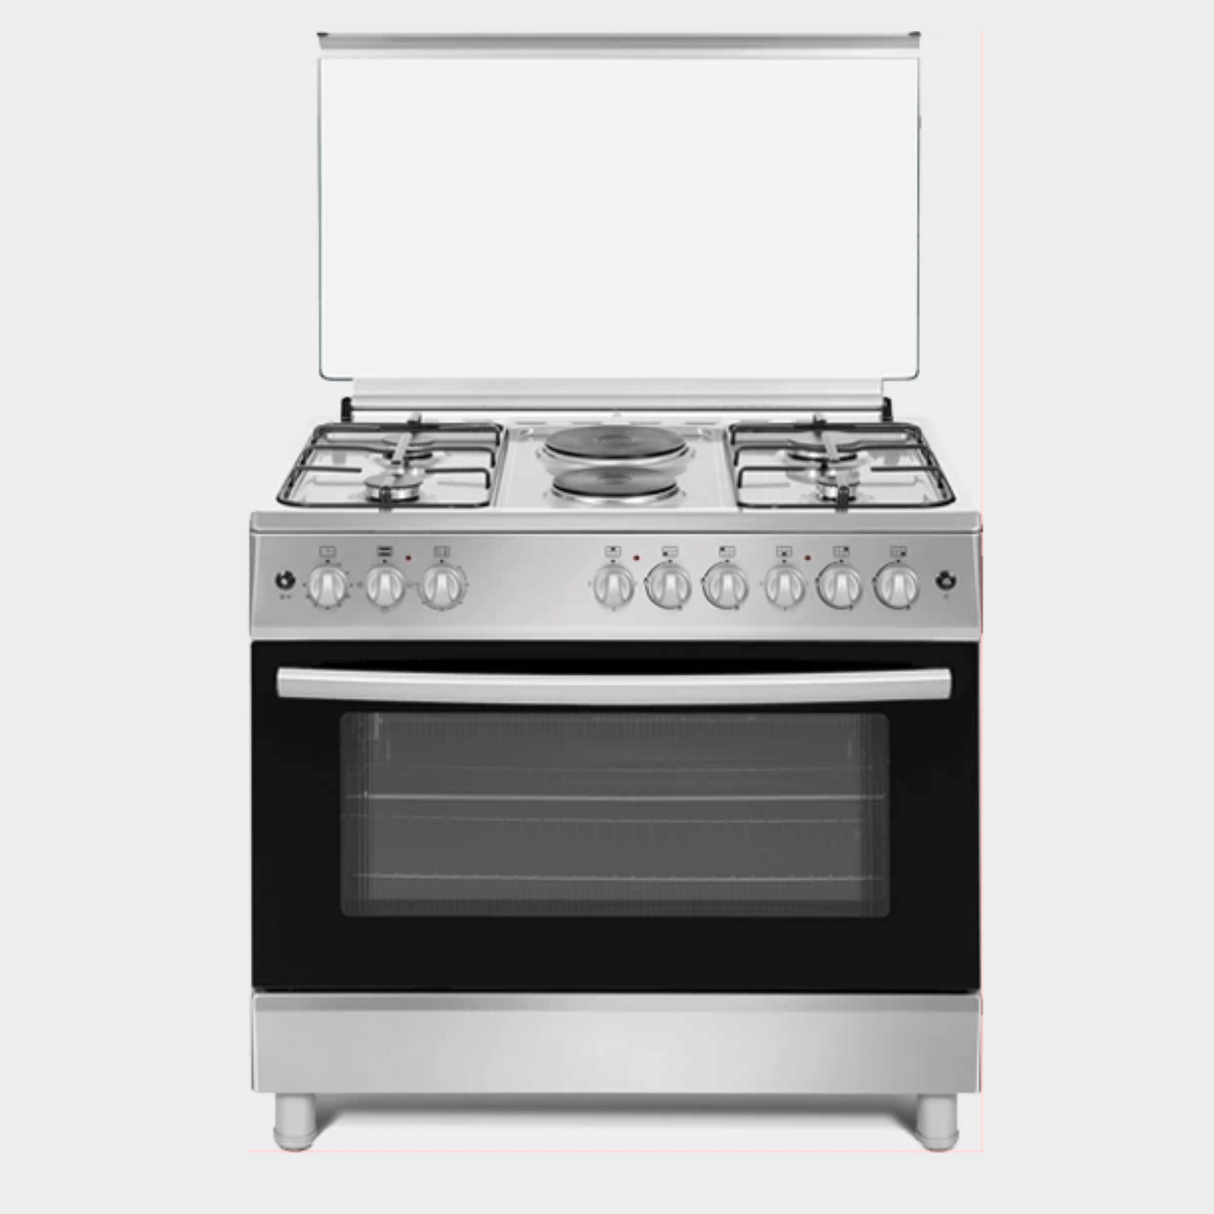 Titan 90x60cm Free Standing Cooker 4 Gas + 2 Electric Freestanding Cooker w/ Electric Oven, TN-FC9420XBS